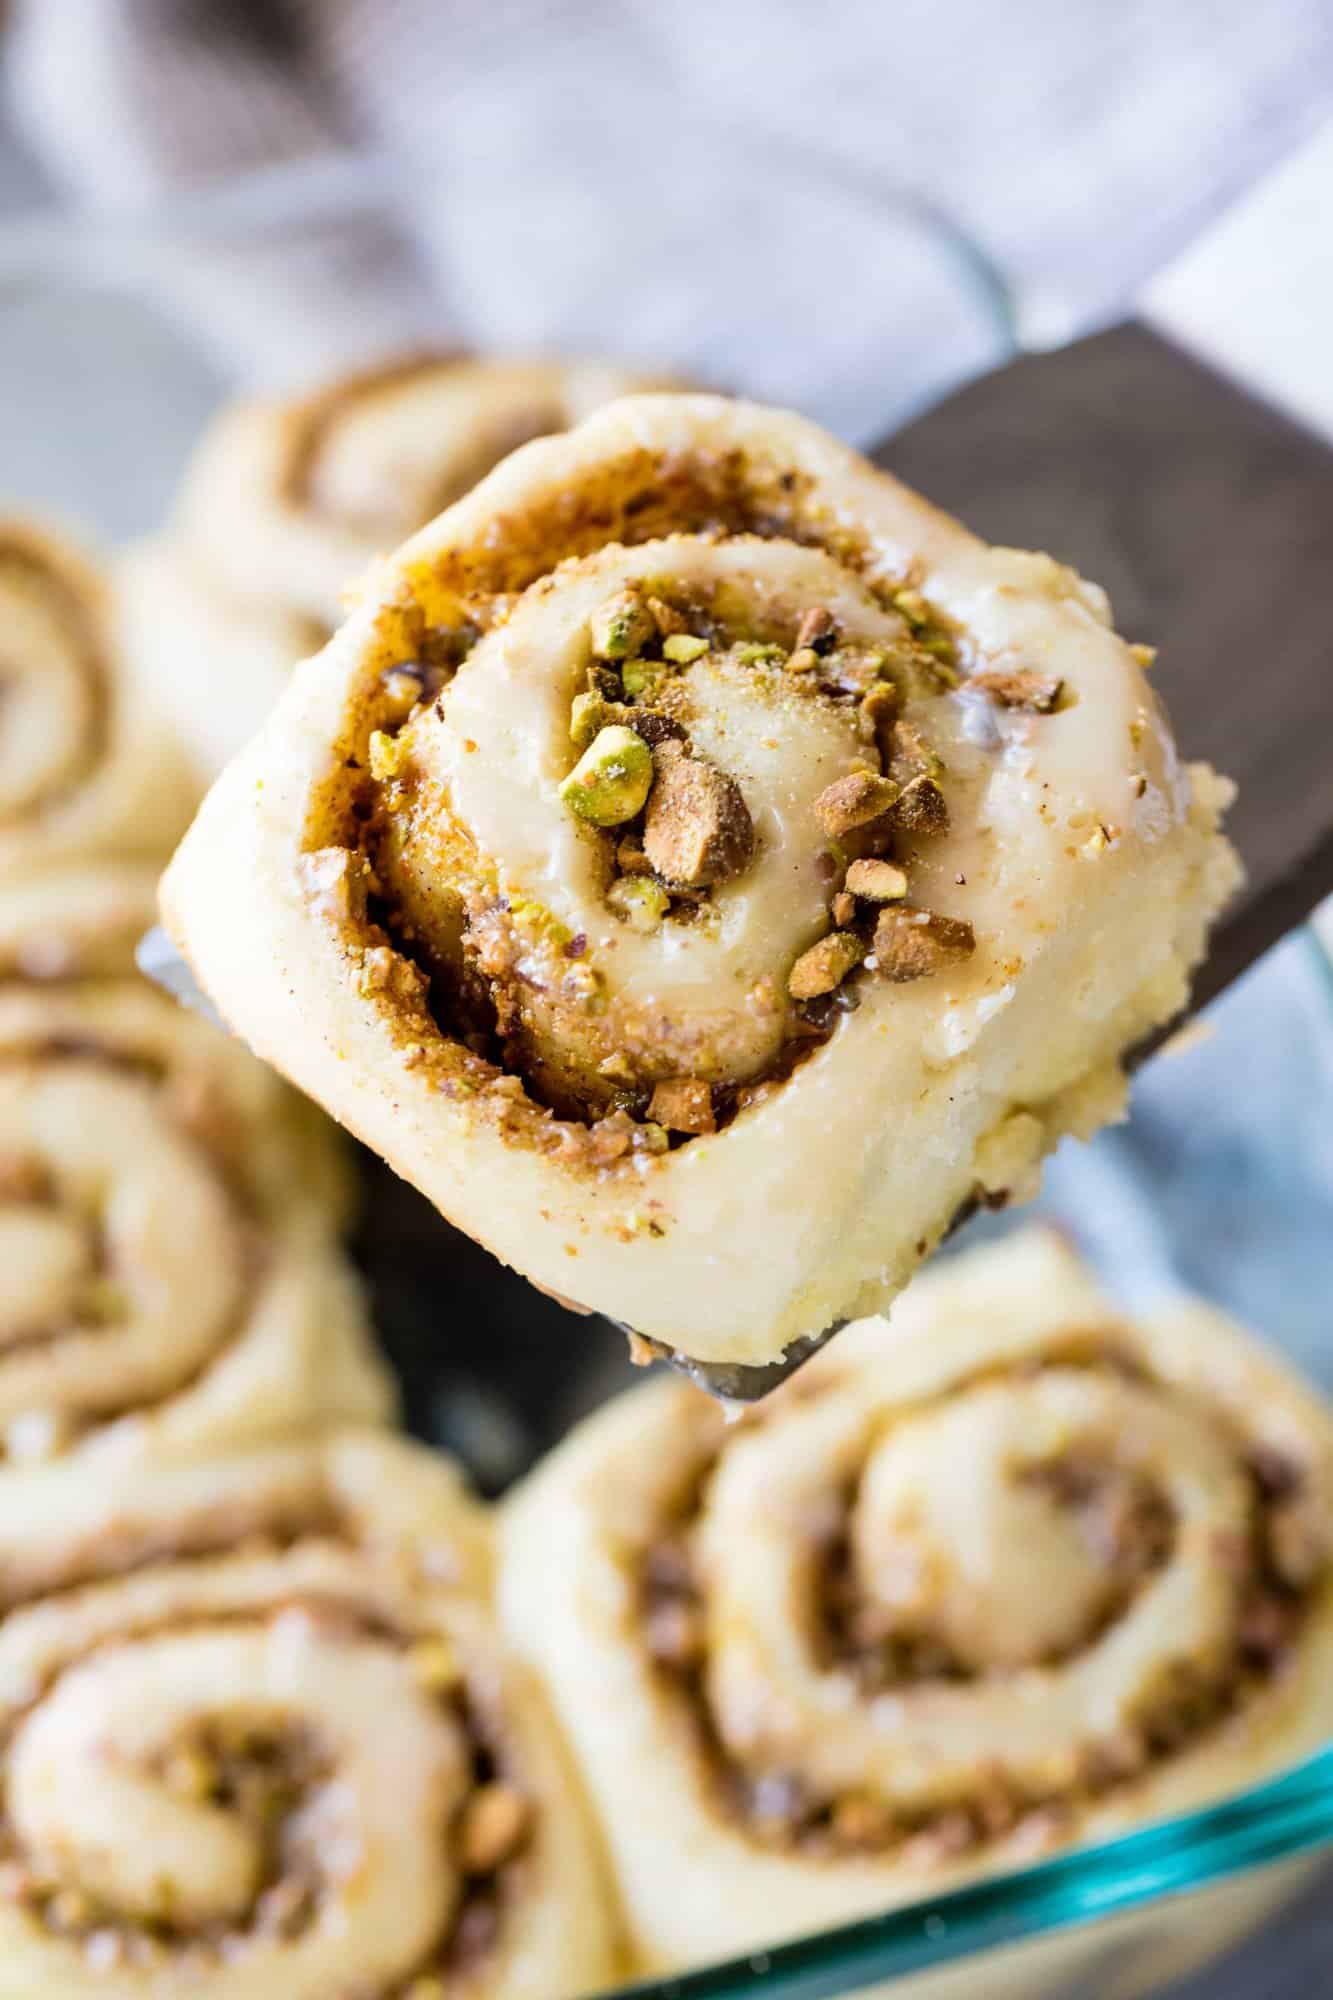 A freshly baked Baklava Cinnamon Roll is lifted from the pan